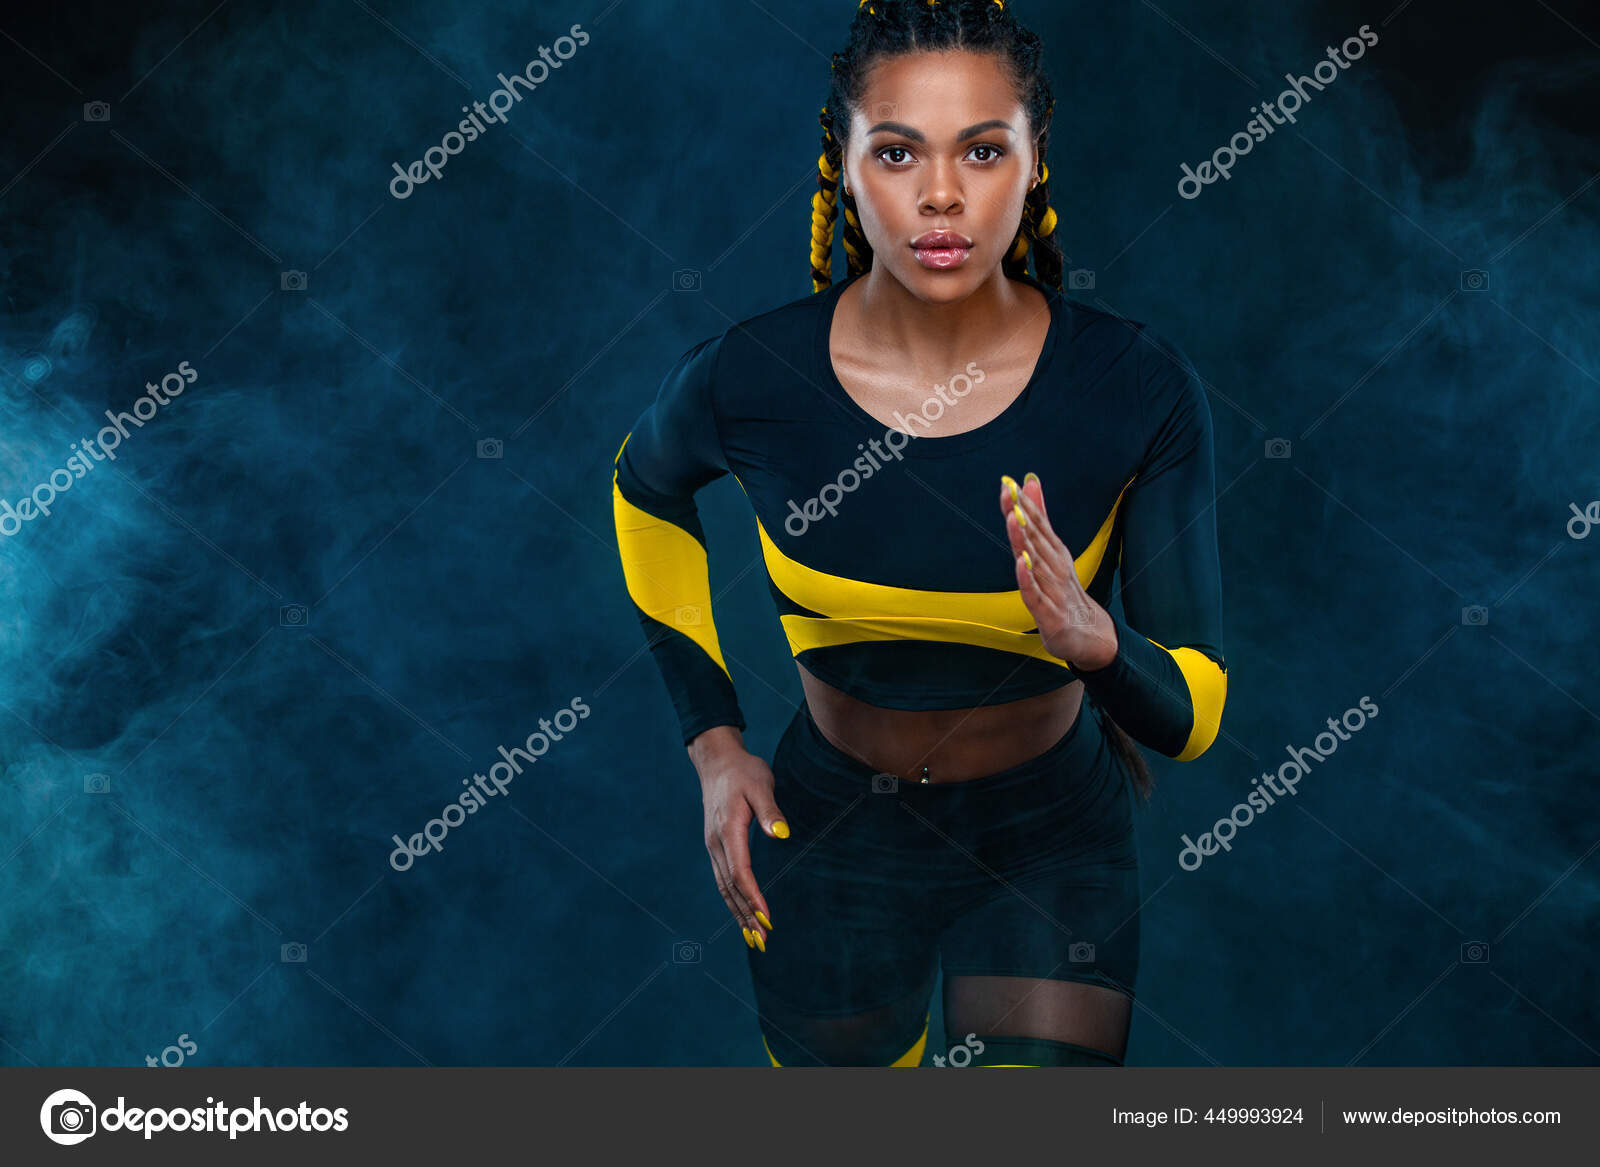 Sprinter run. Strong athletic woman running on black background